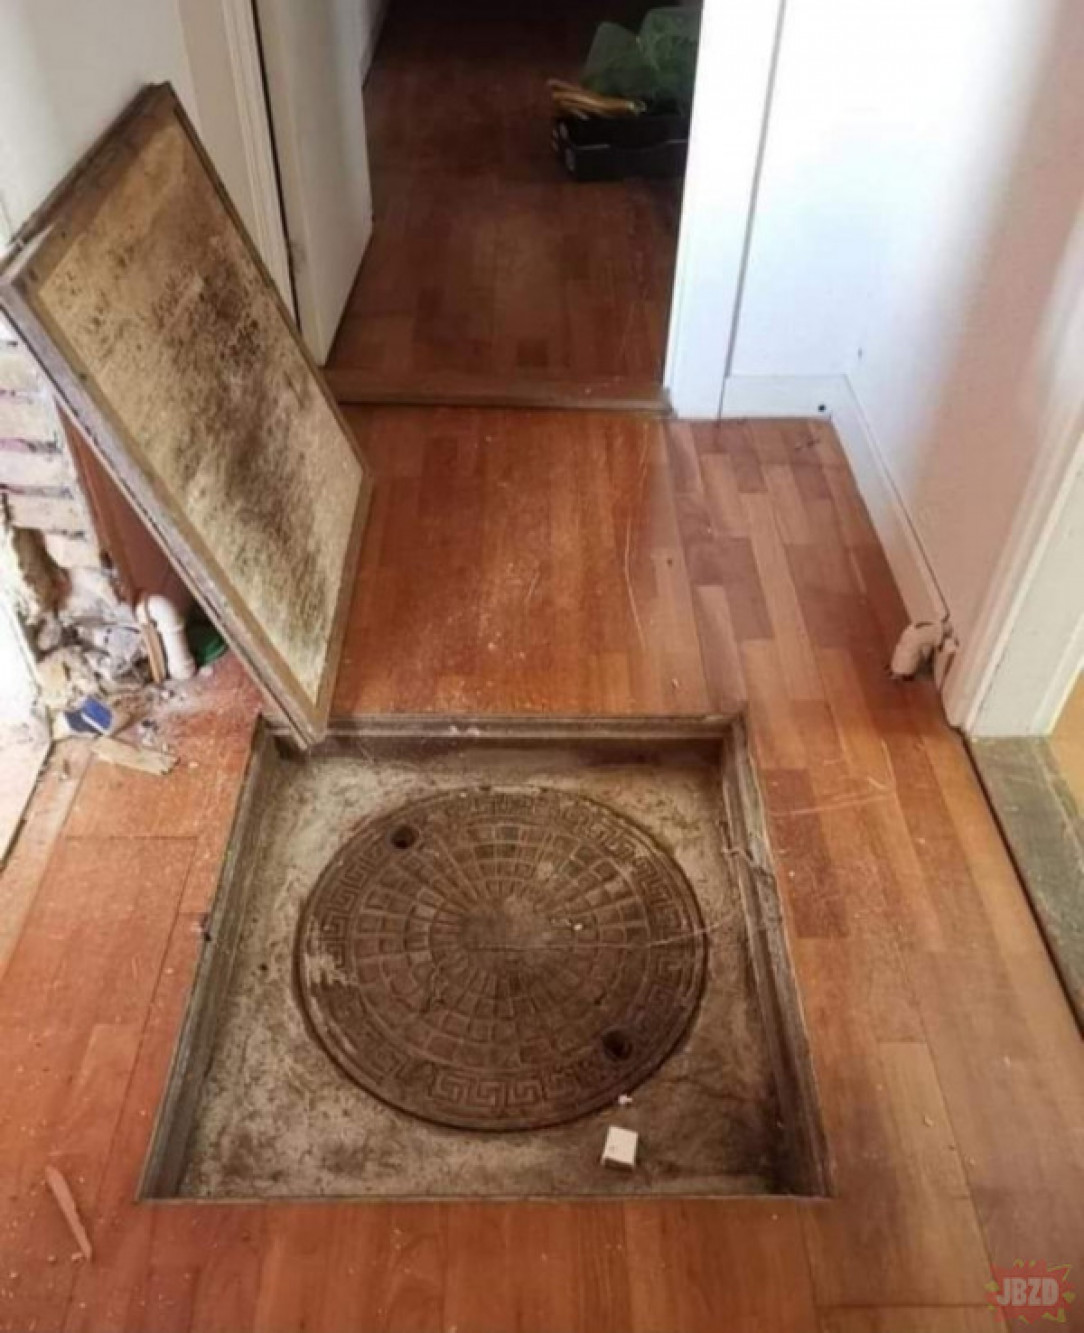 A manhole in the middle of the house